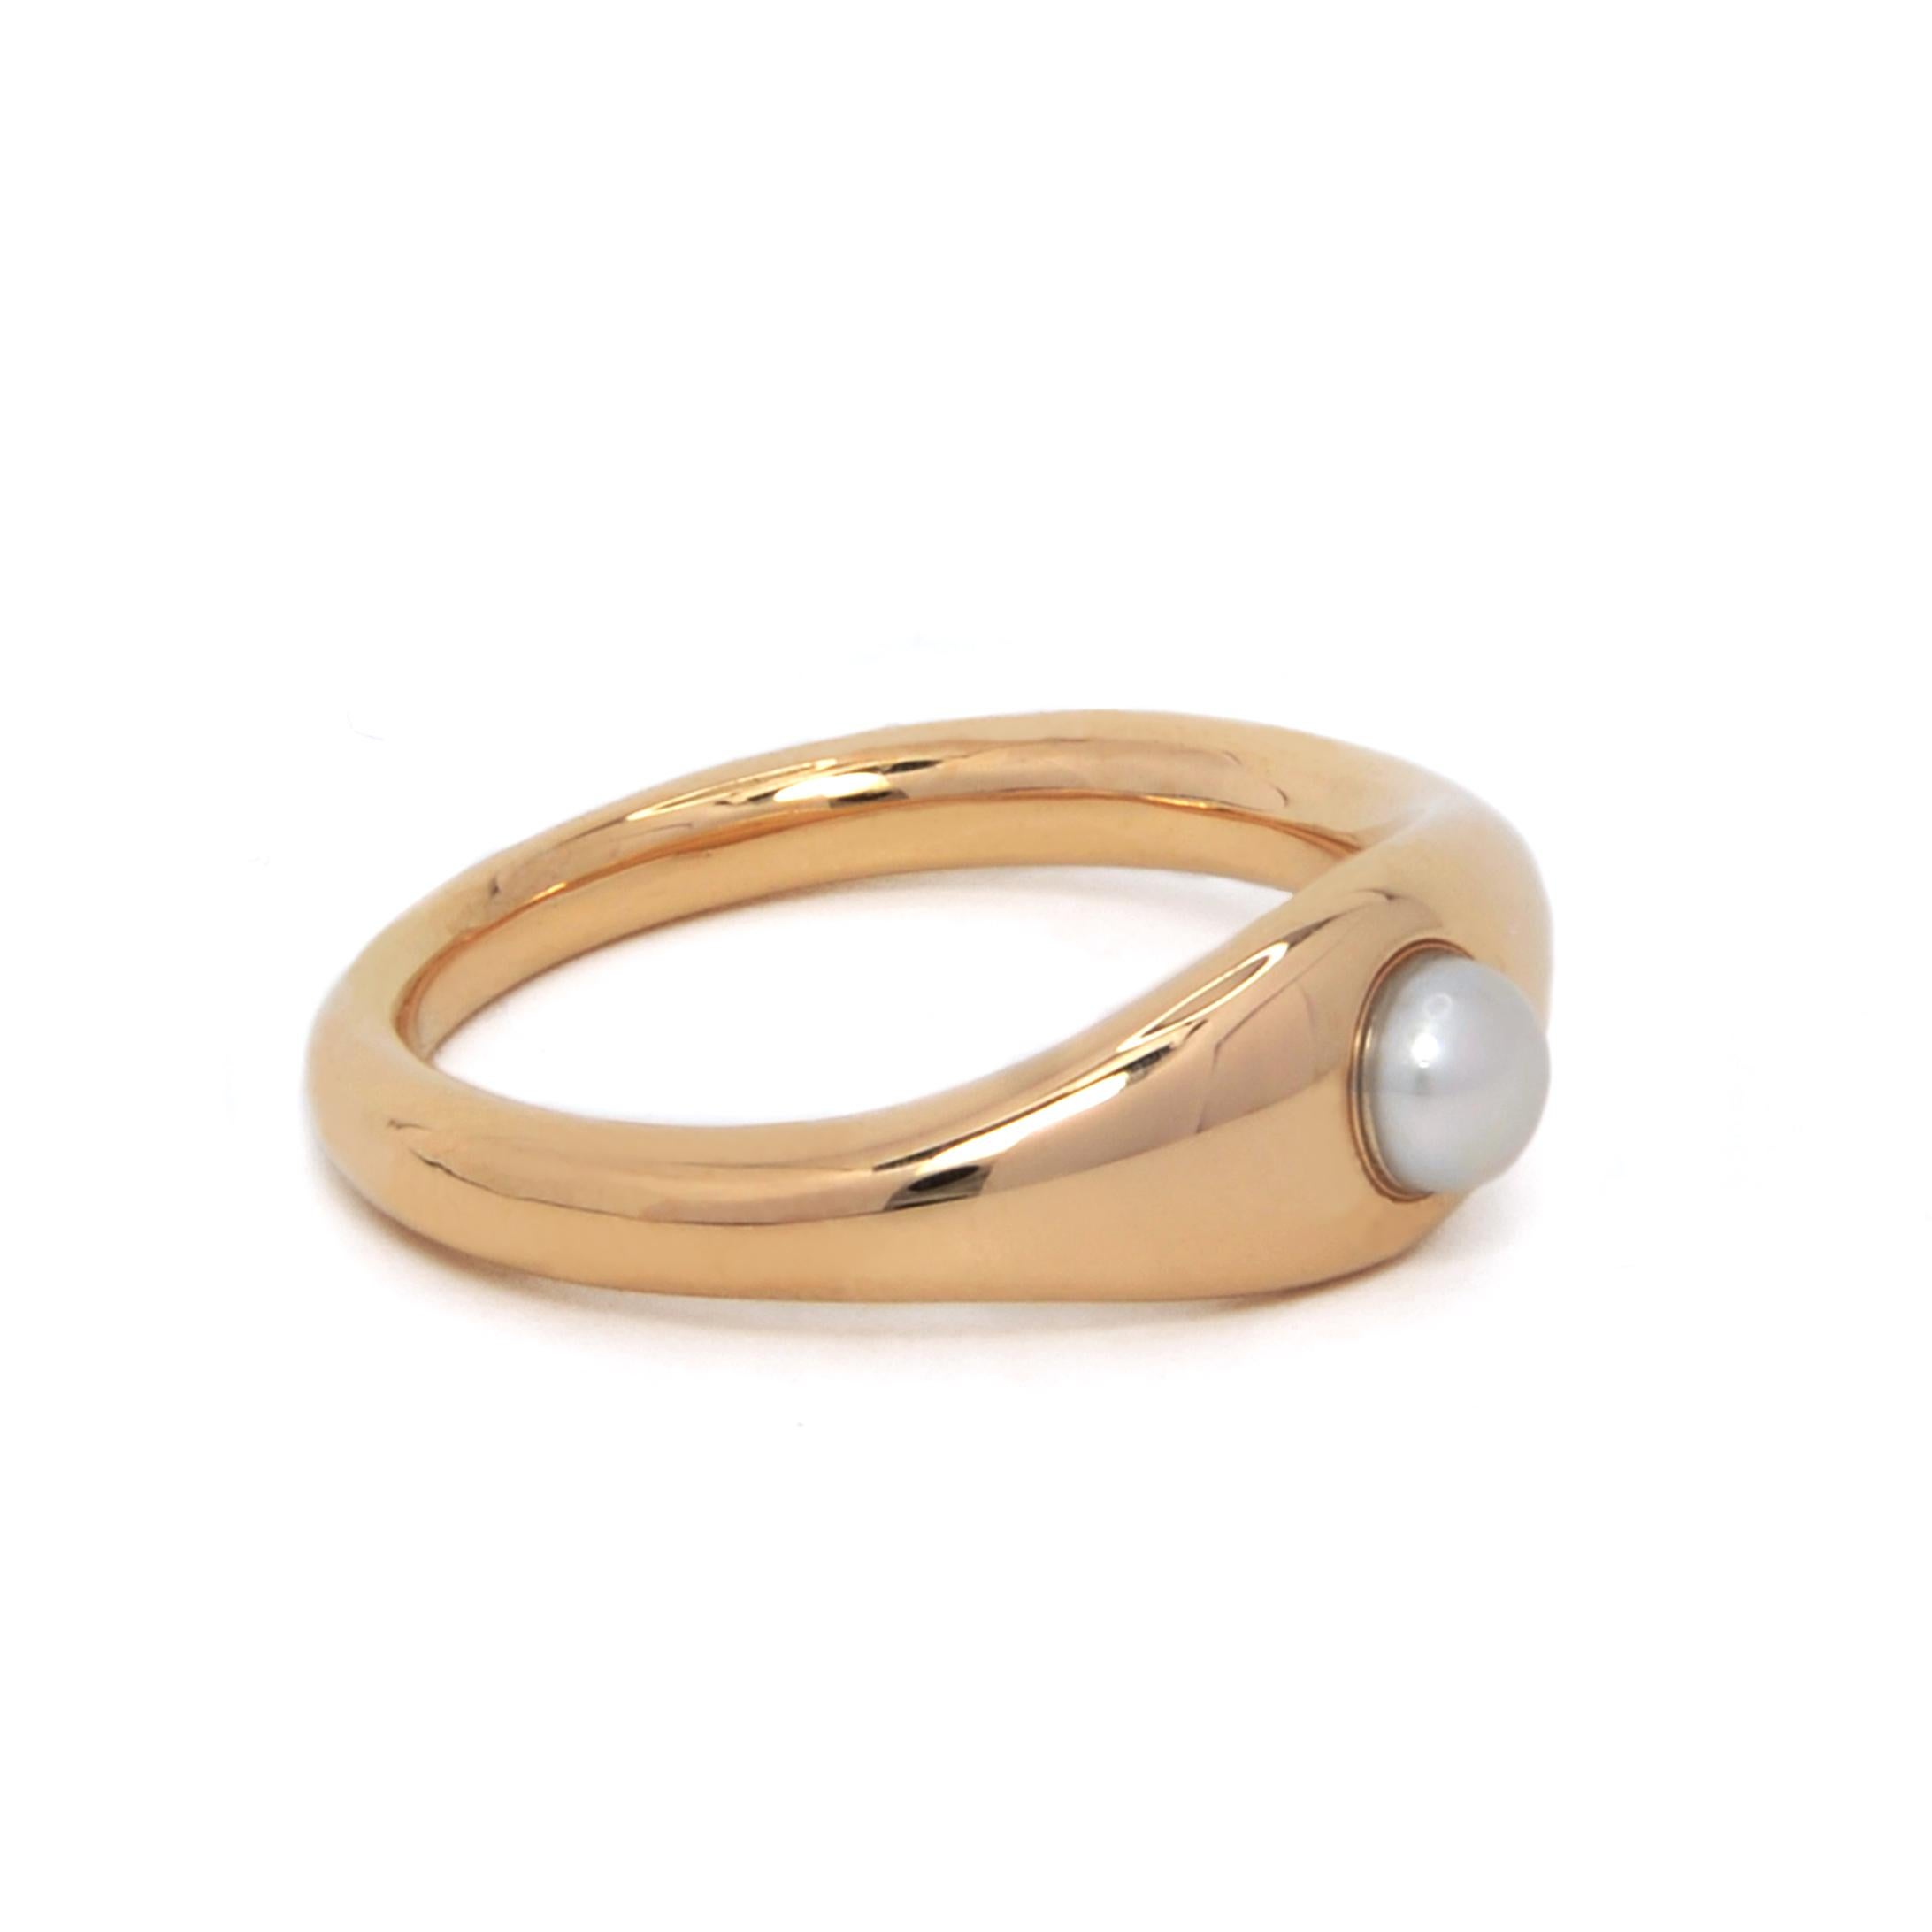 For Sale:  Ruth Nyc Lun Ring, 14k Yellow Gold and Pearl Ring 4